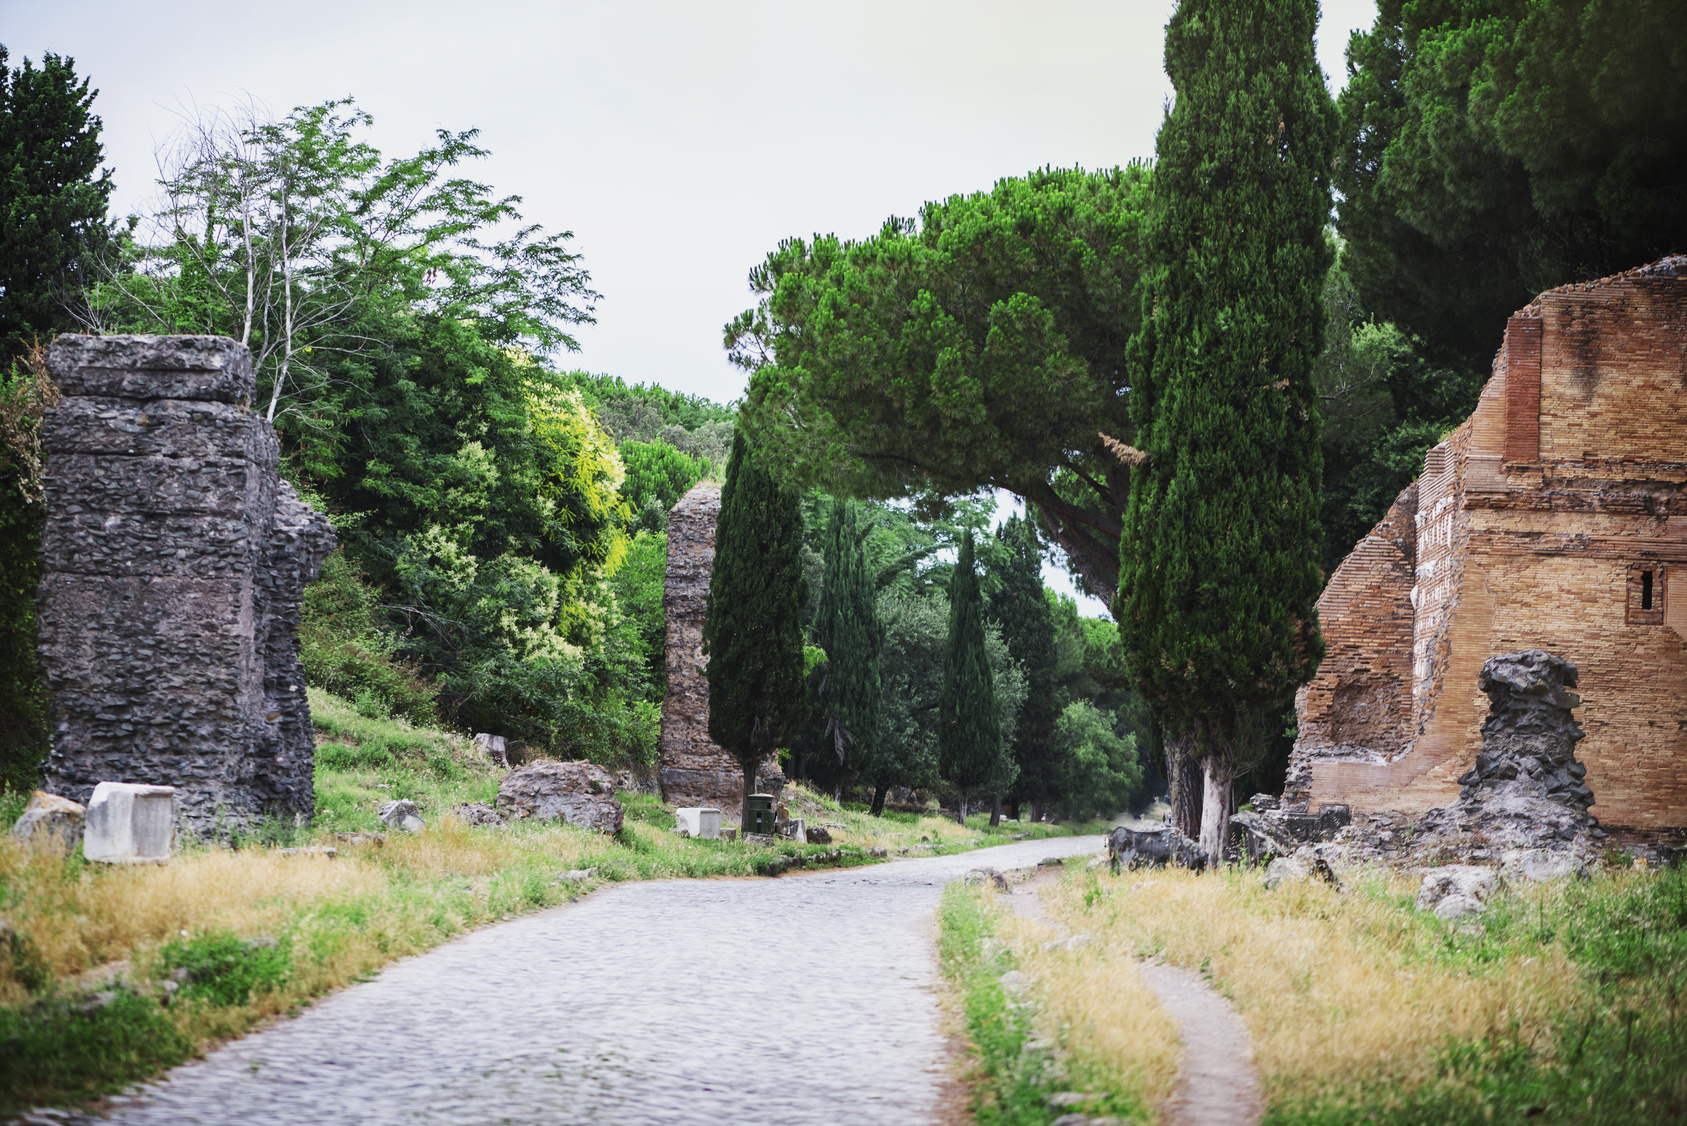 Appian Way with the original pavement (Rome)